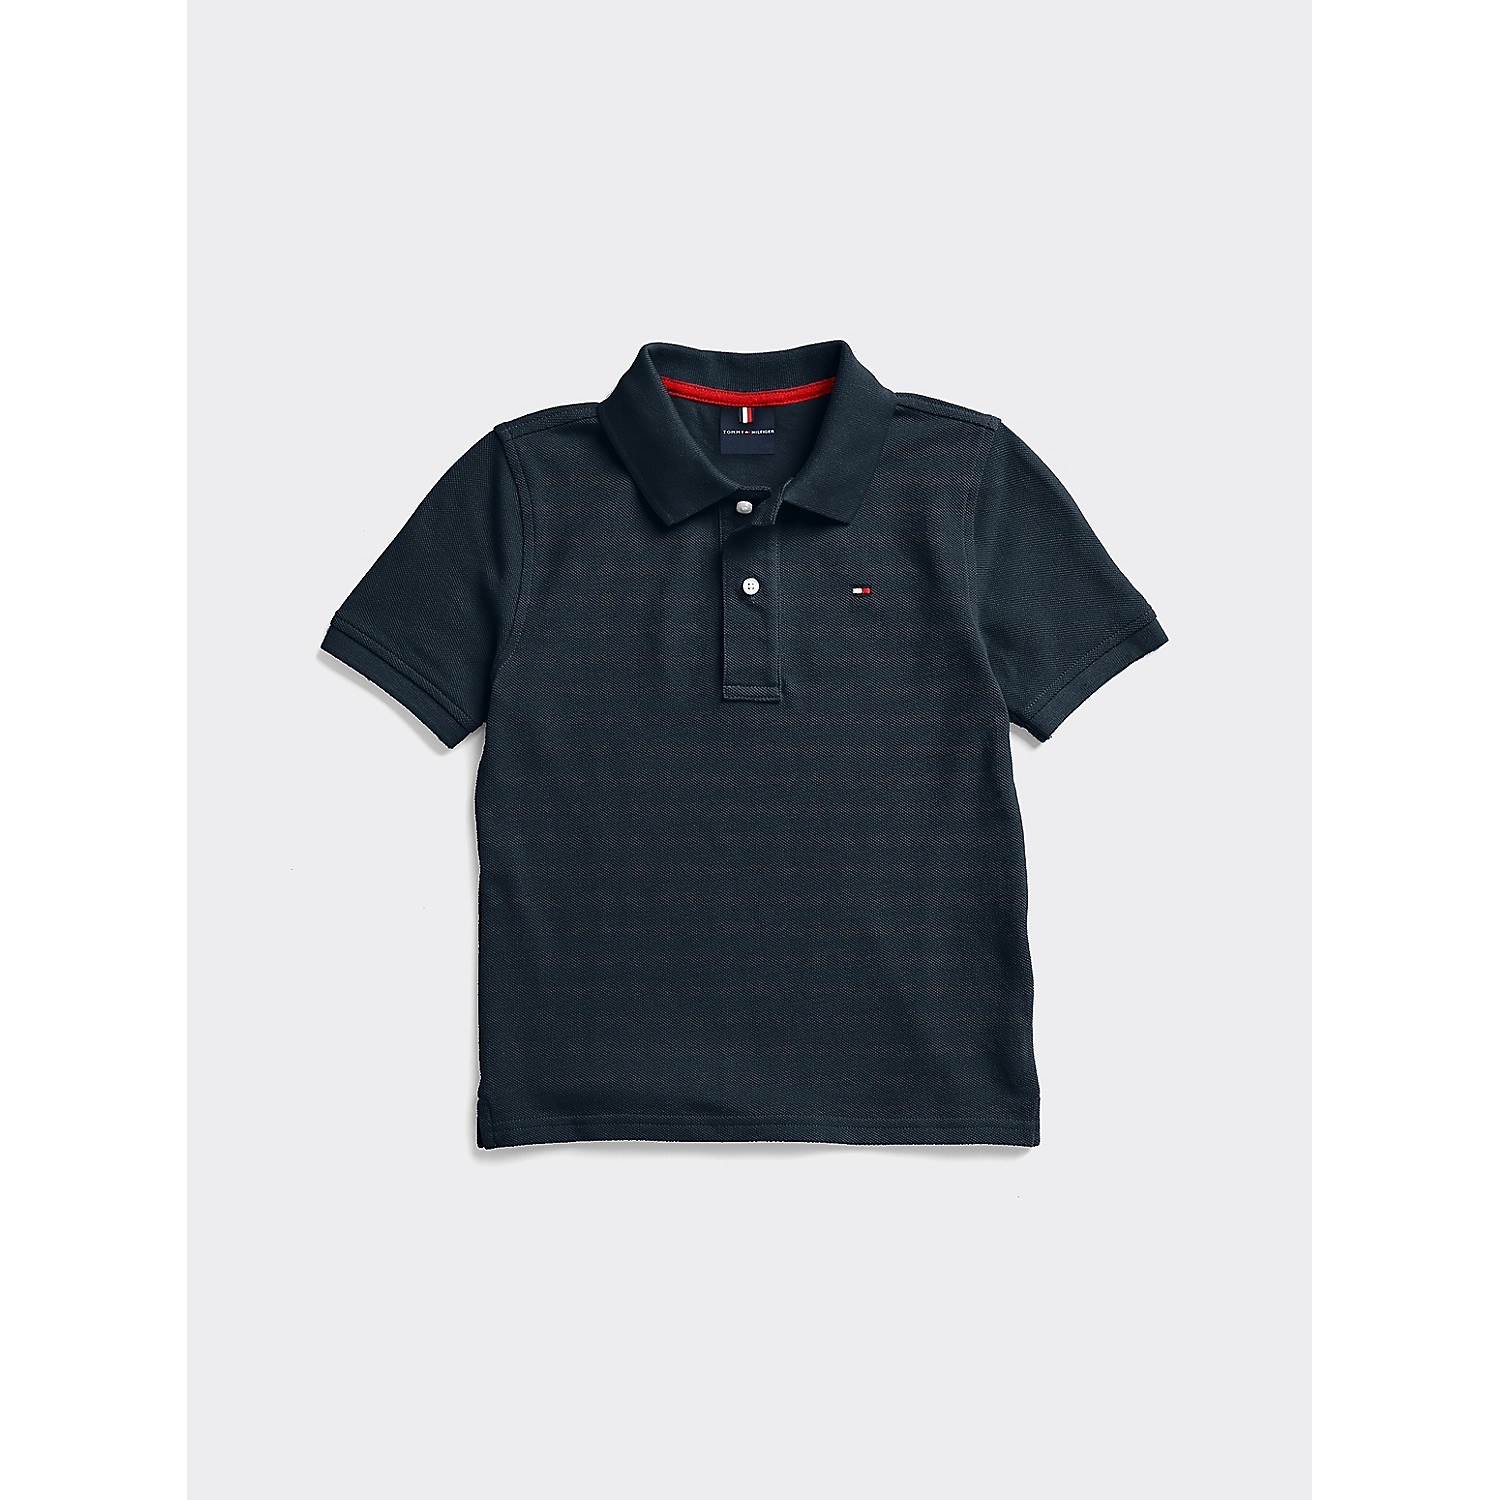 TOMMY HILFIGER Kids Classic Polo